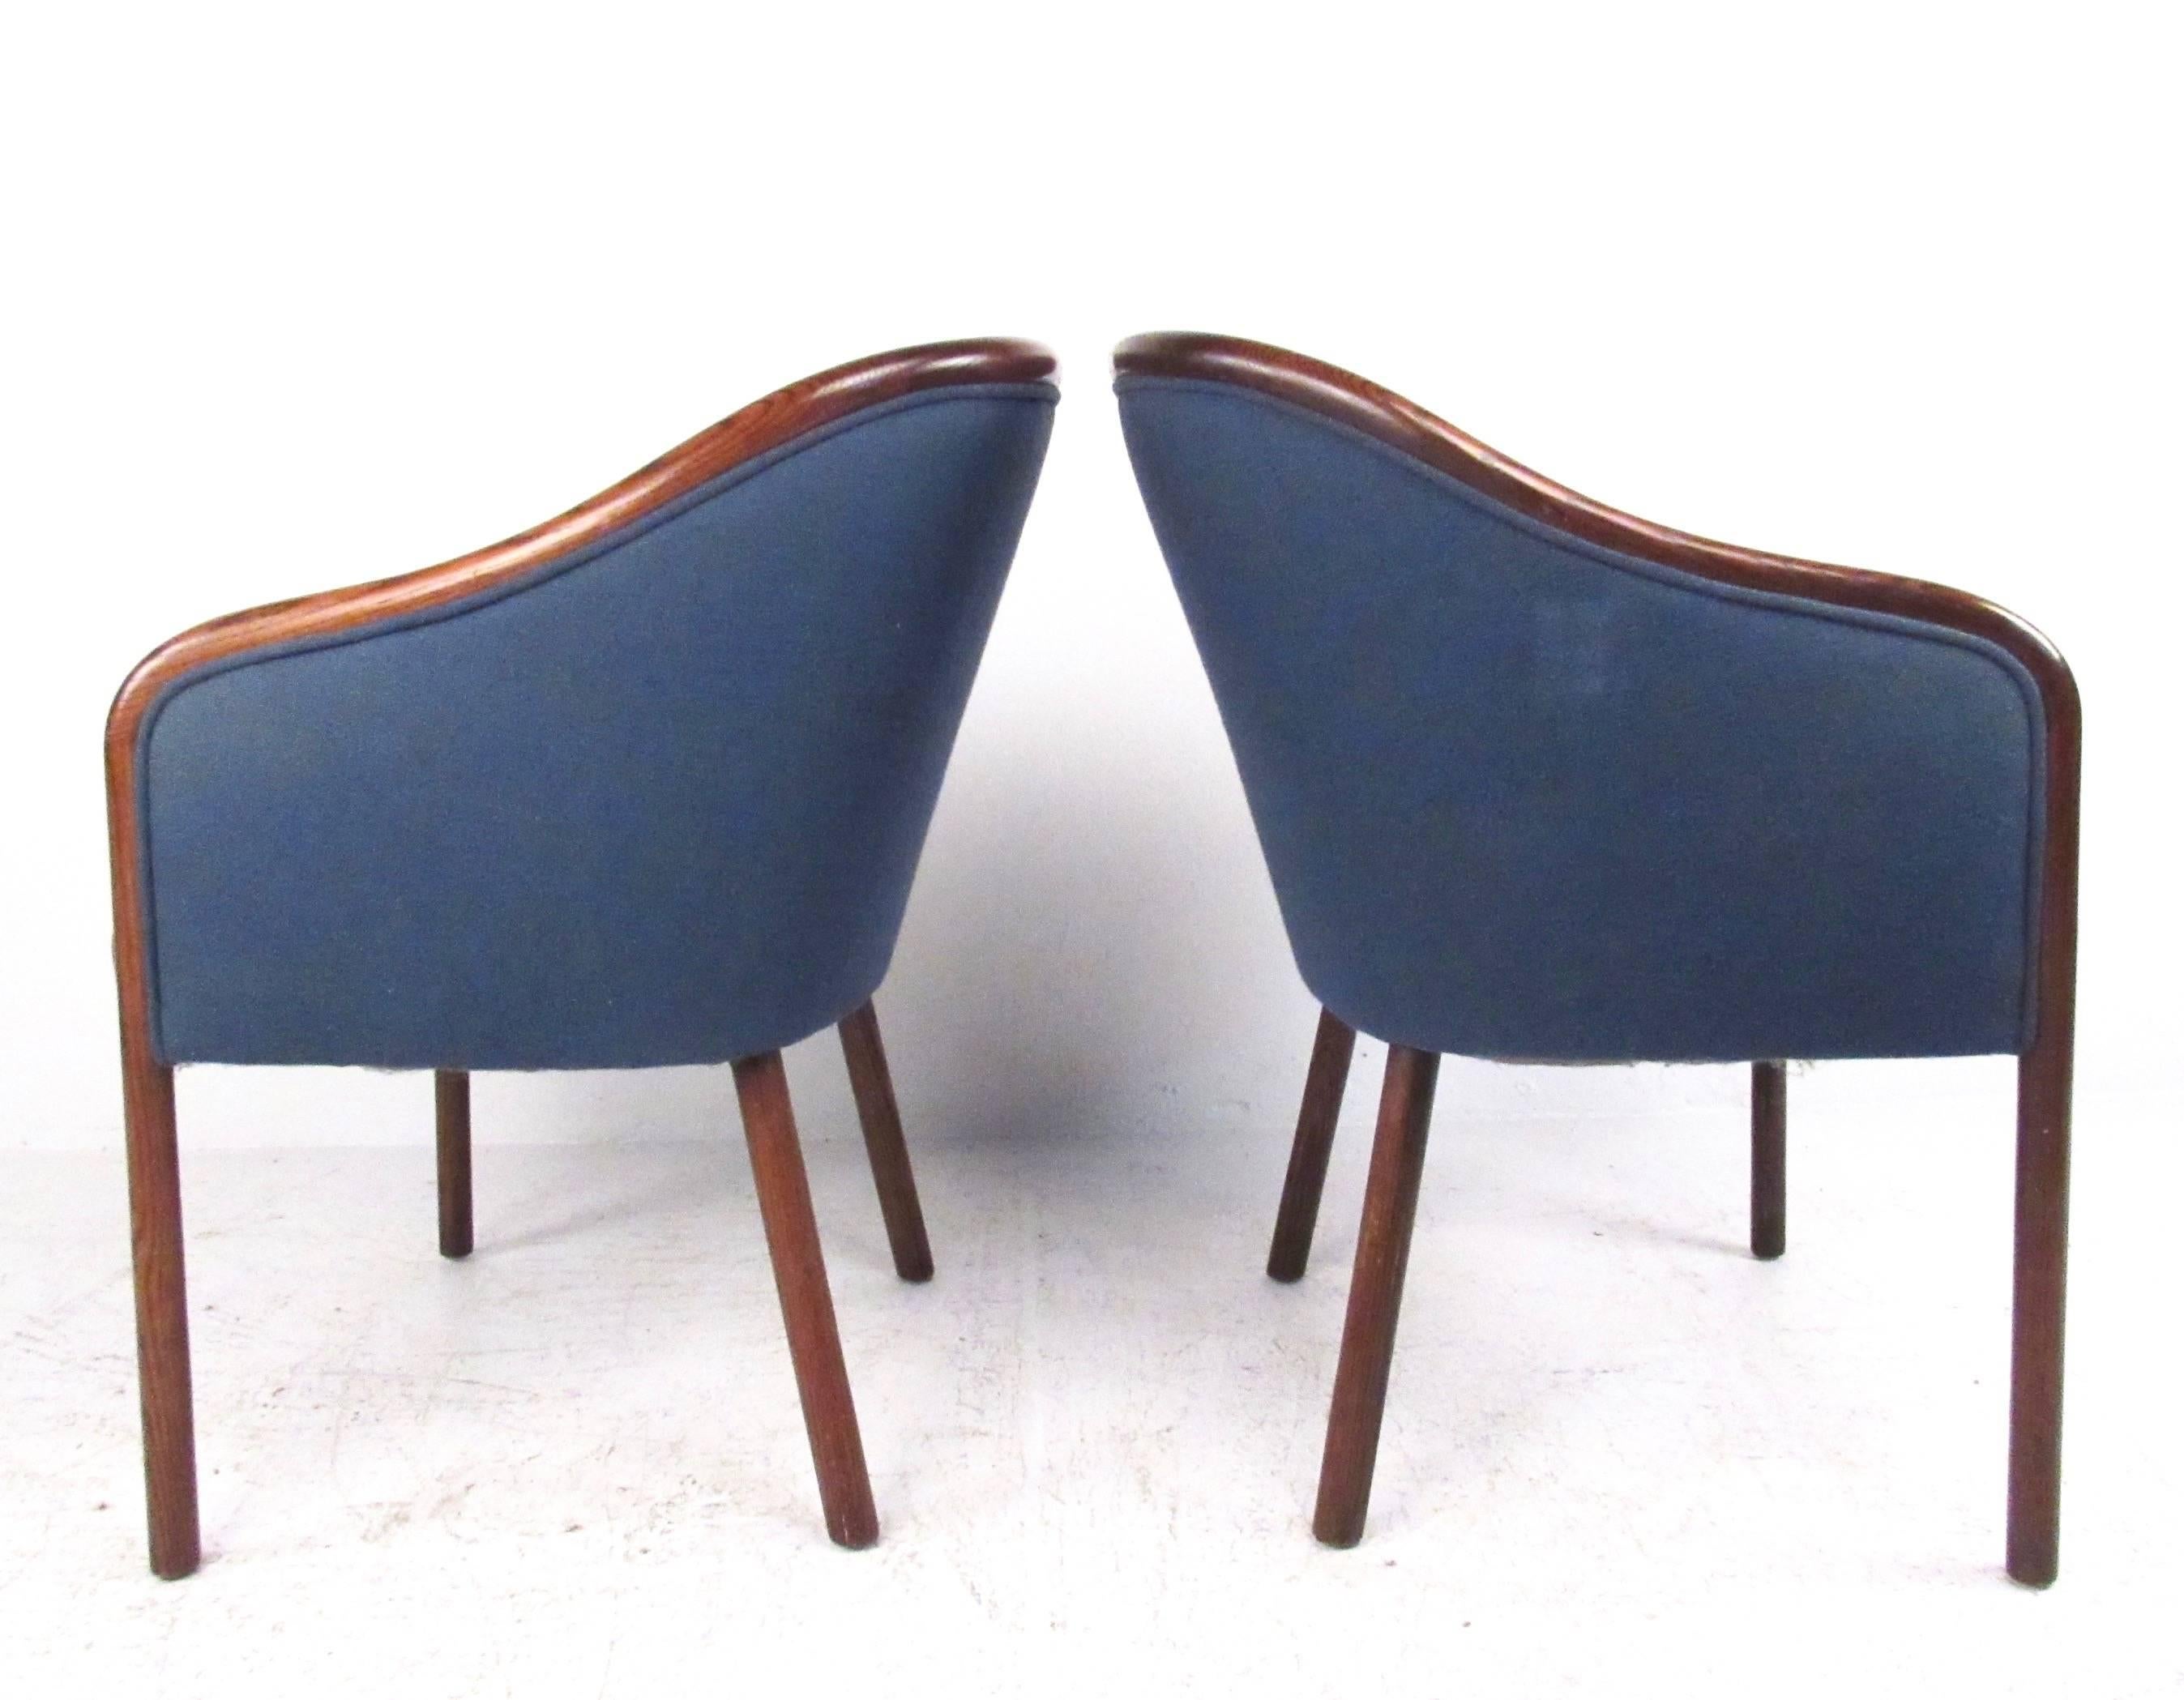 Late 20th Century Pair of Mid-Century Modern Rosewood Side Chairs